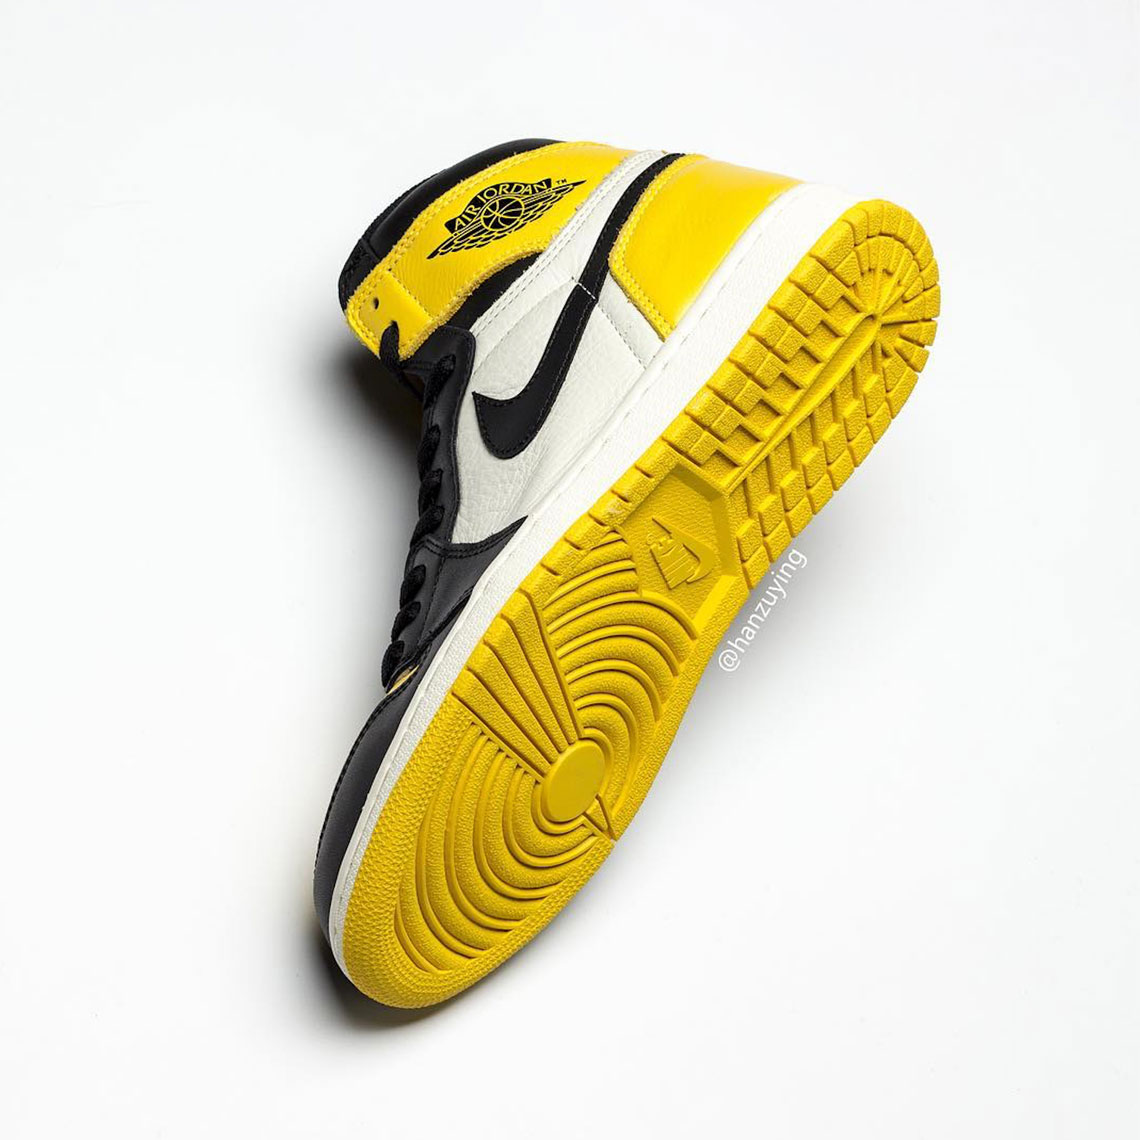 the Air Jordan 1 won t be the only silhouette Yellow Toe Ar1020 700 4